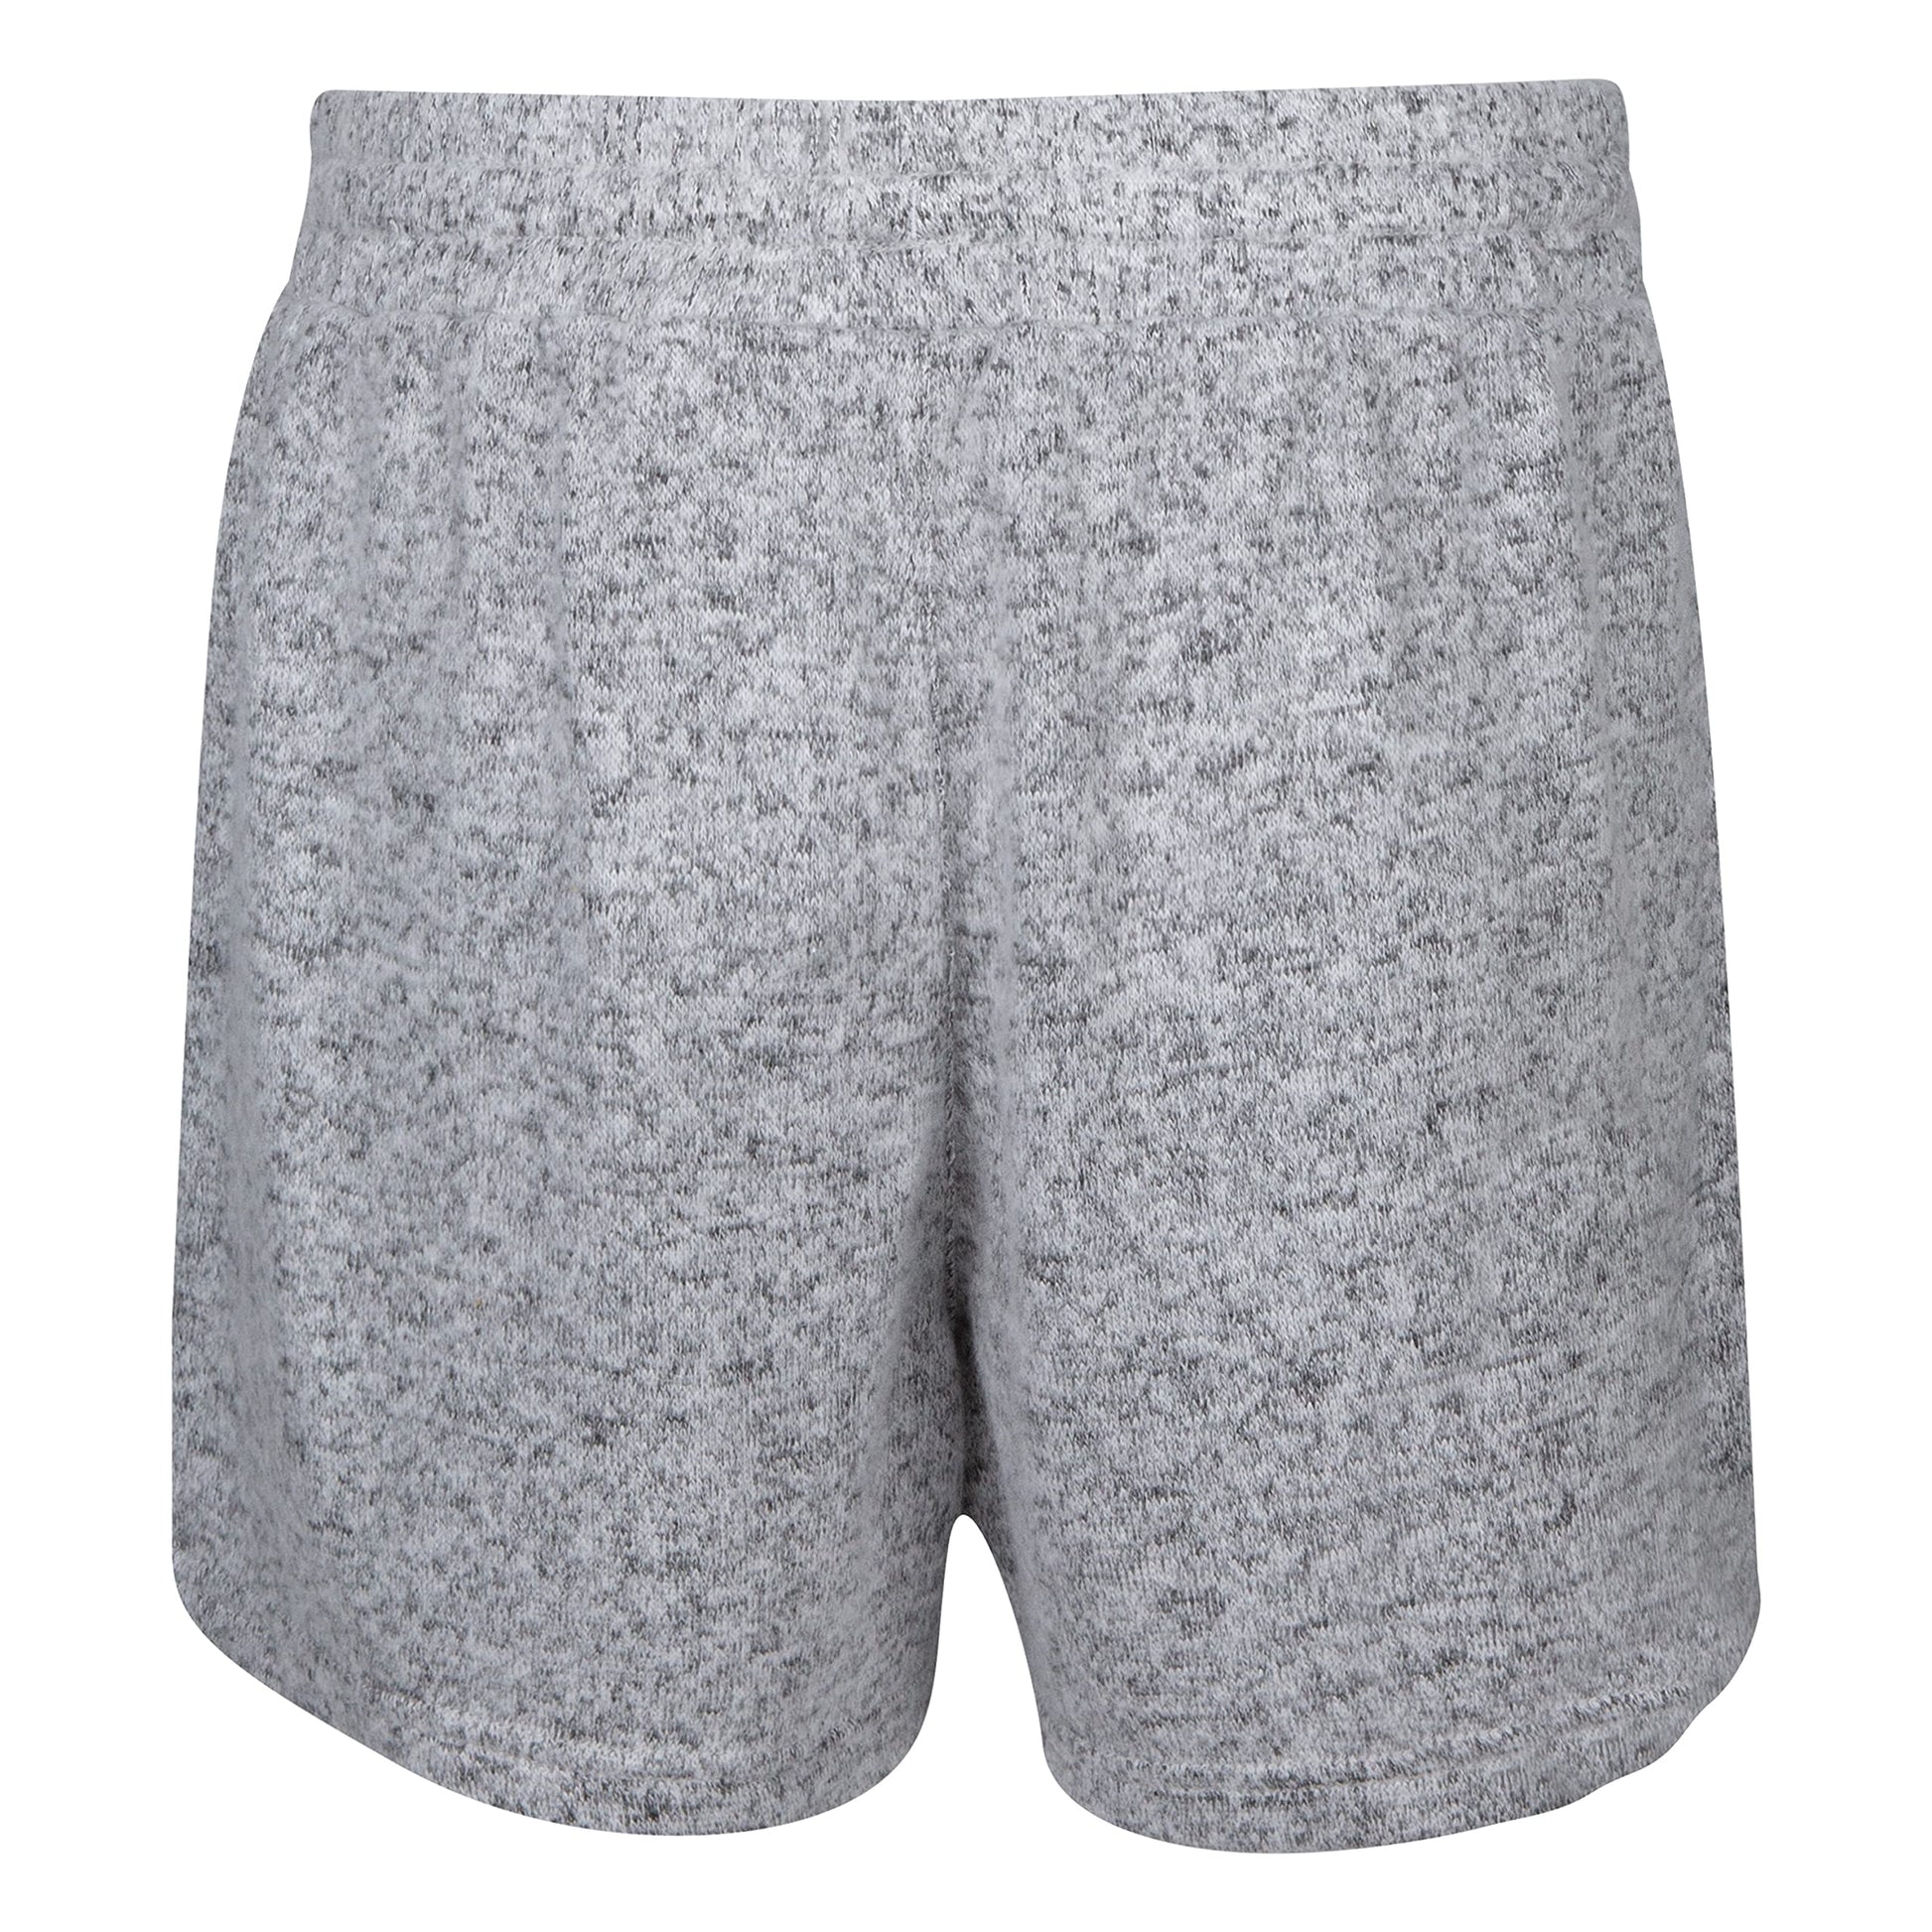 Image 2 of Soft Hacci Shorts (Toddler/Little Kids)